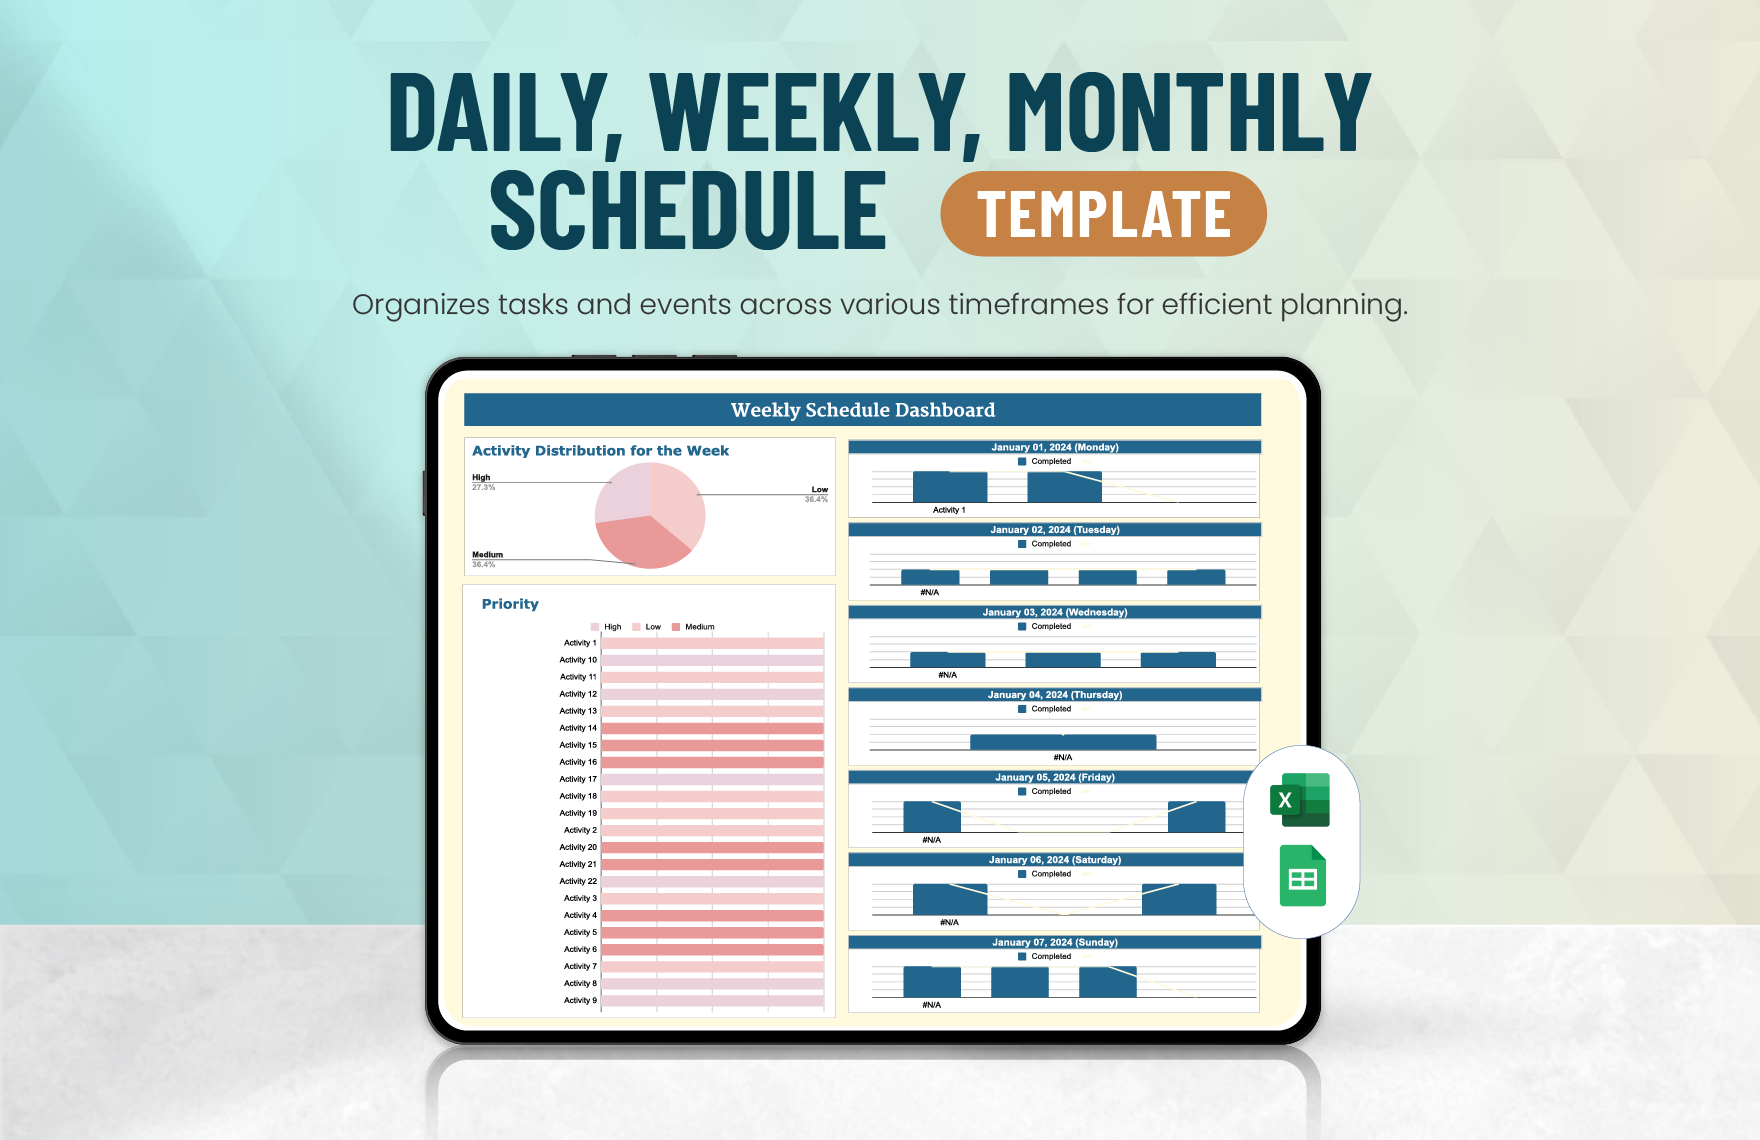 Free Daily, Weekly, Monthly Schedule Template in Excel, Google Sheets